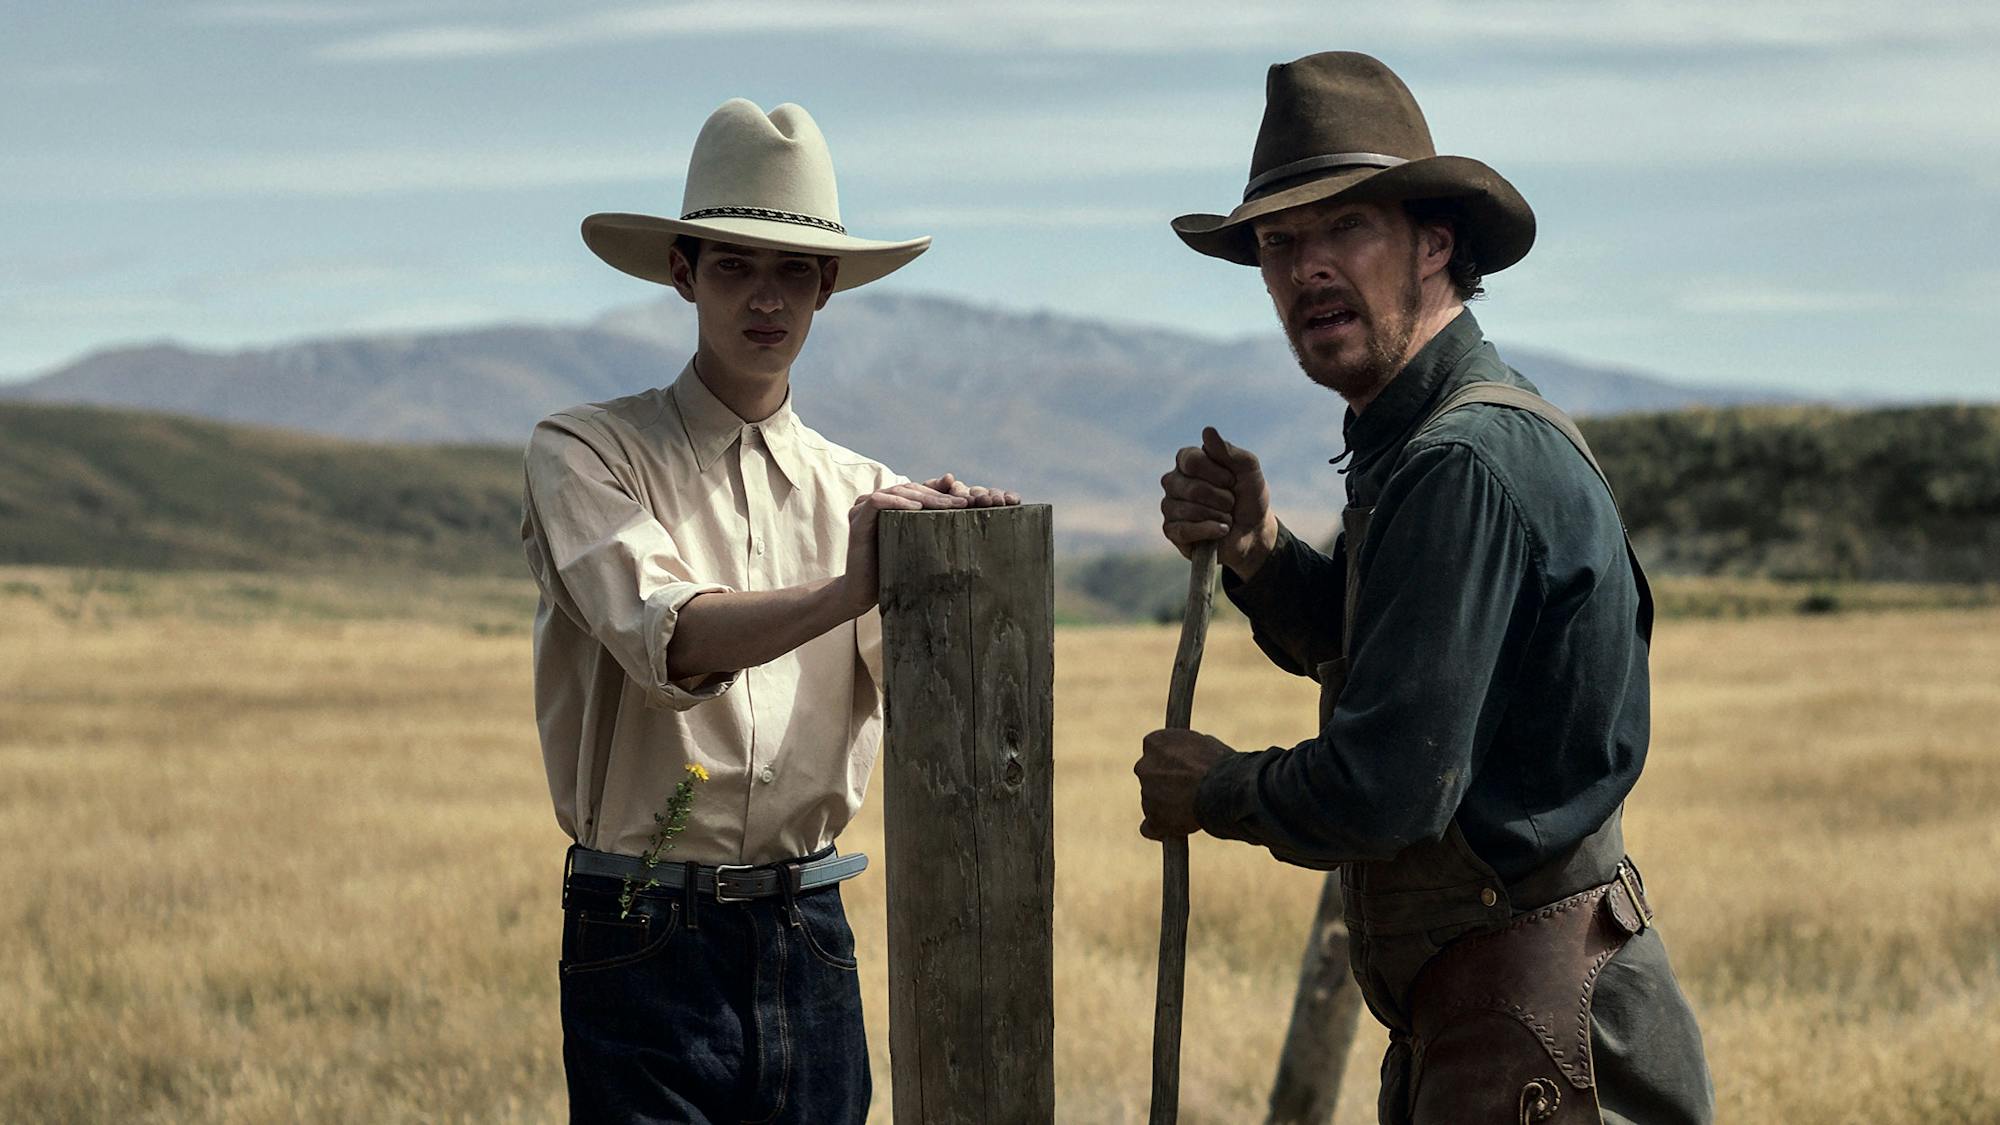 Peter Gordon (Kodi Smit-McPhee) and Phil Burbank (Benedict Cumberbatch) stand in a field. Behind them are green-blue mountains. They both wear wide brimmed hats and workshirts.